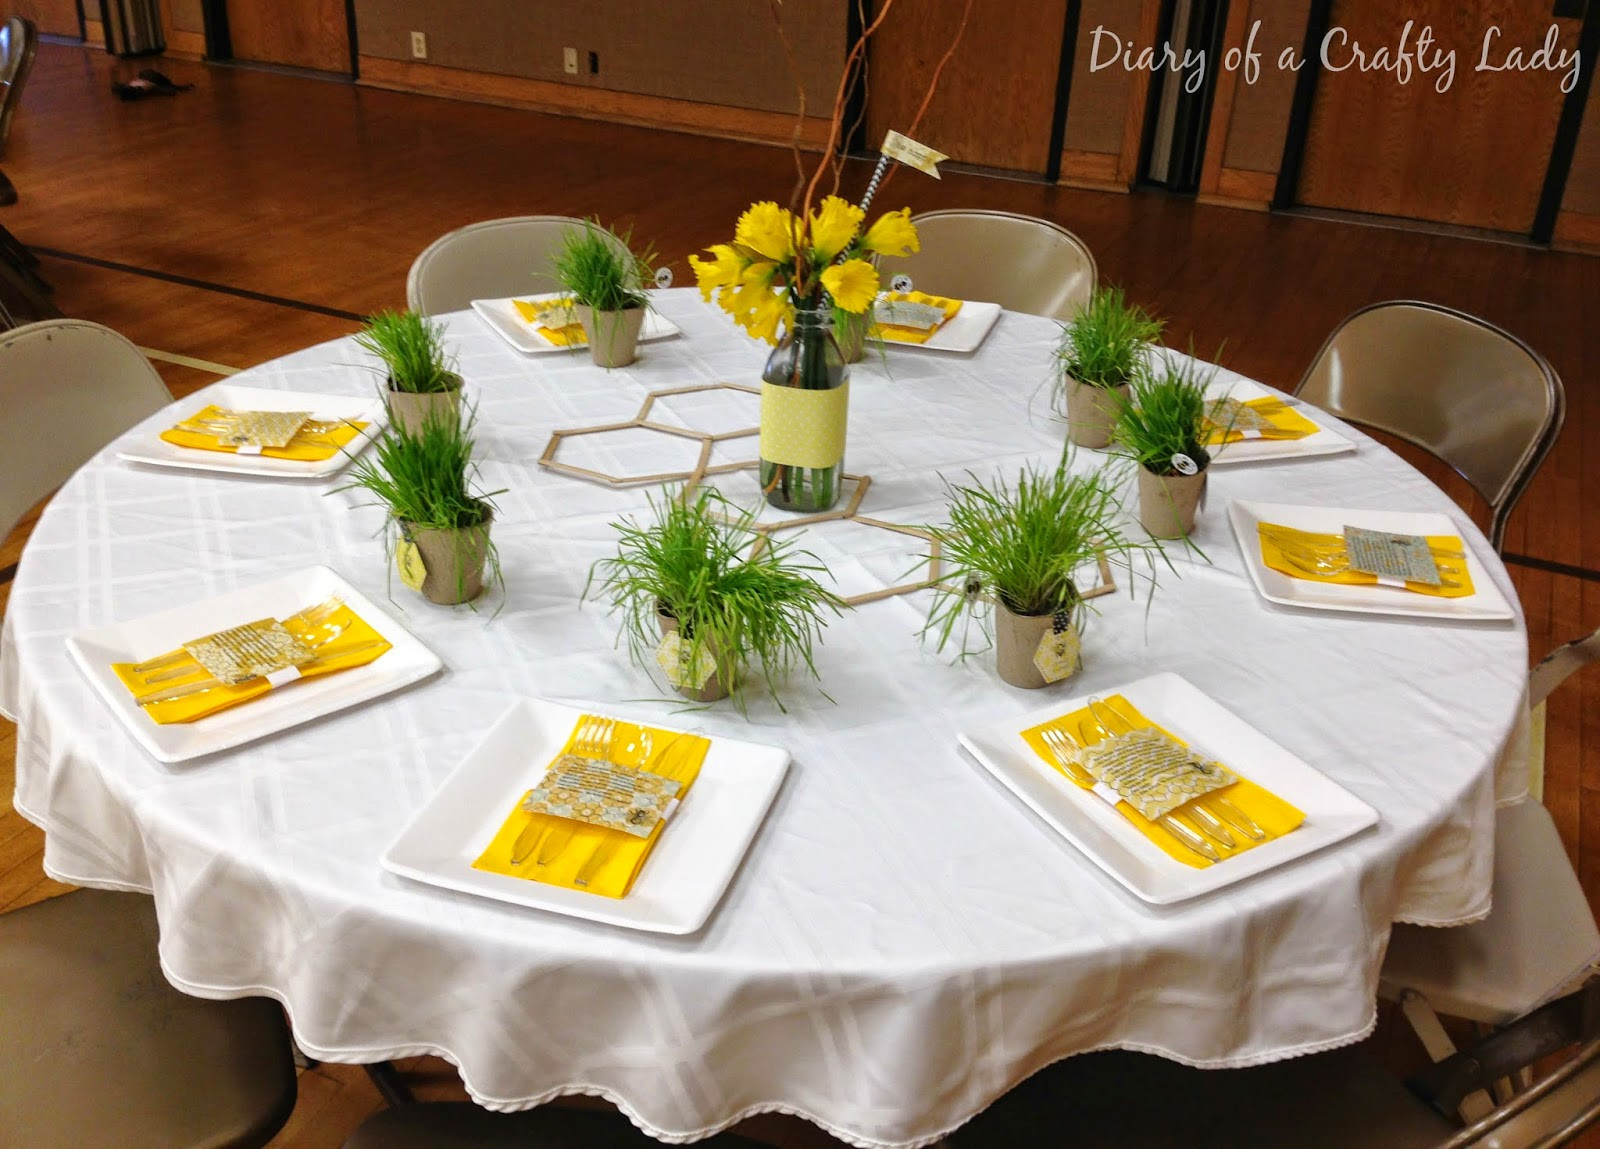 Spring Dinner Party Ideas
 Diary of a Crafty Lady Spring Dinner Party Bee